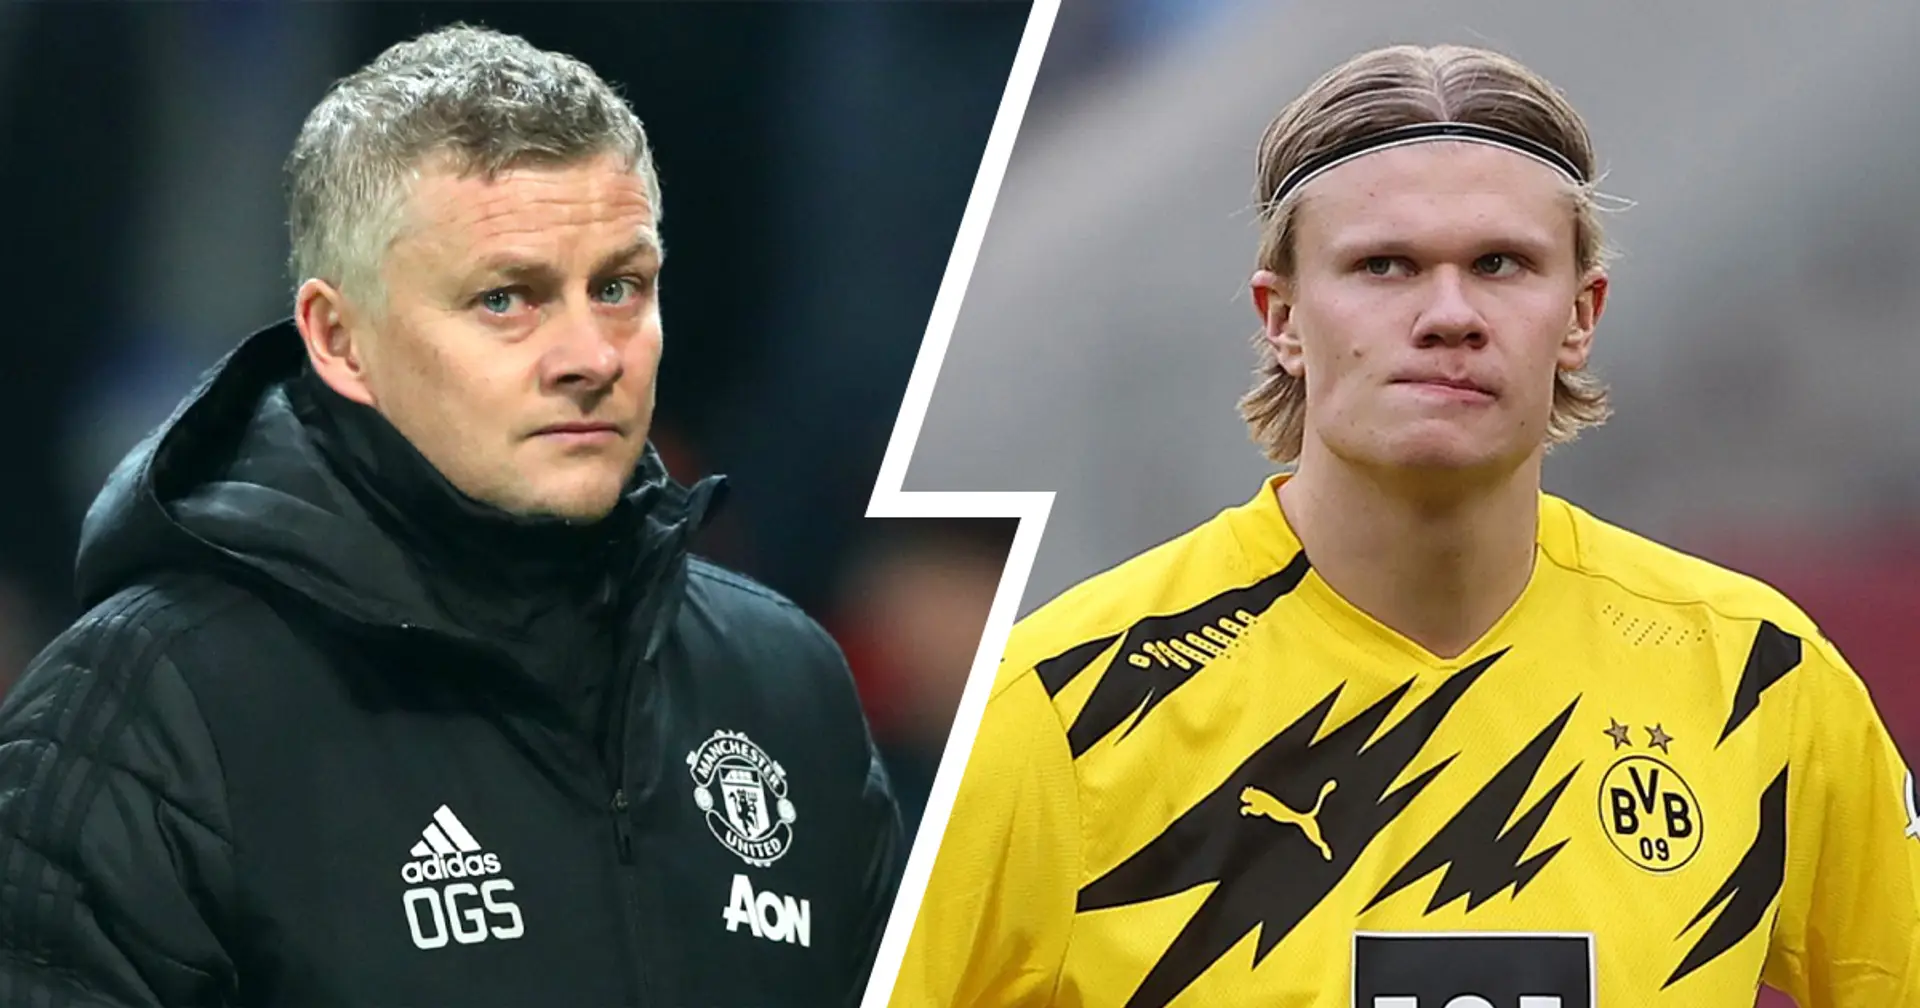 Man United told they are 'not good enough' for Erling Haaland